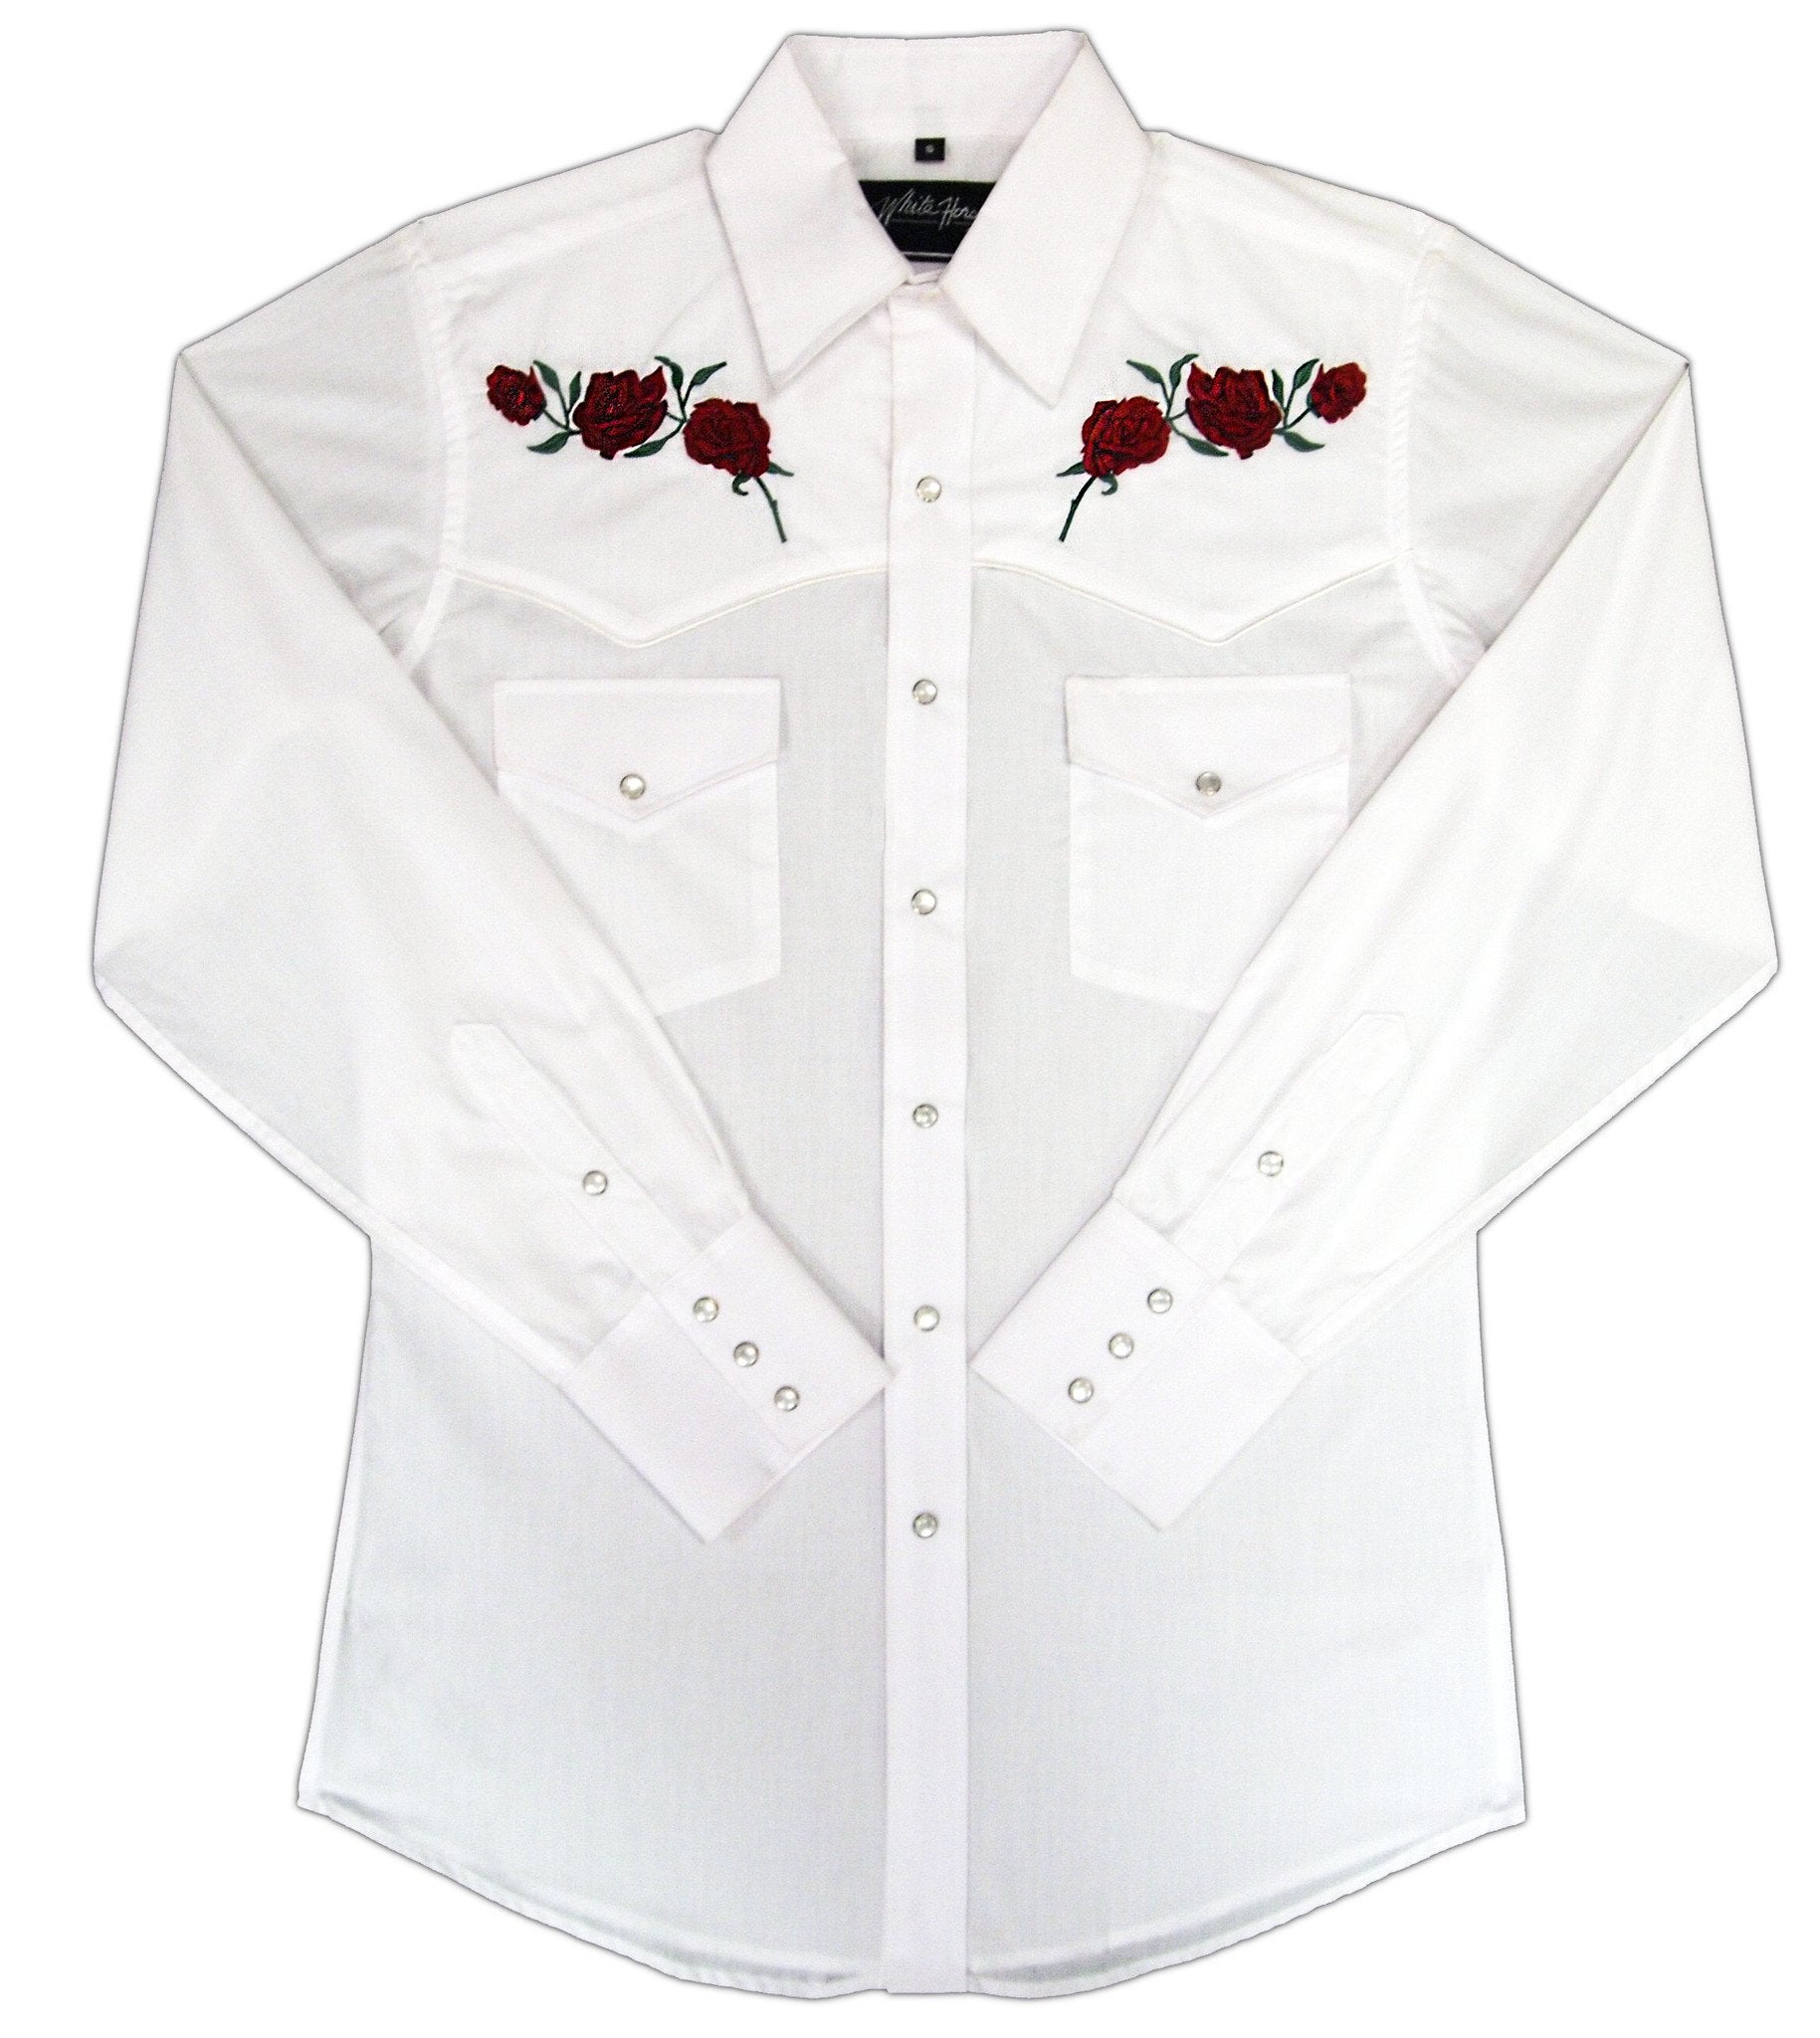 White Horse Apparel Men's Western Shirt Embroidered Roses on White